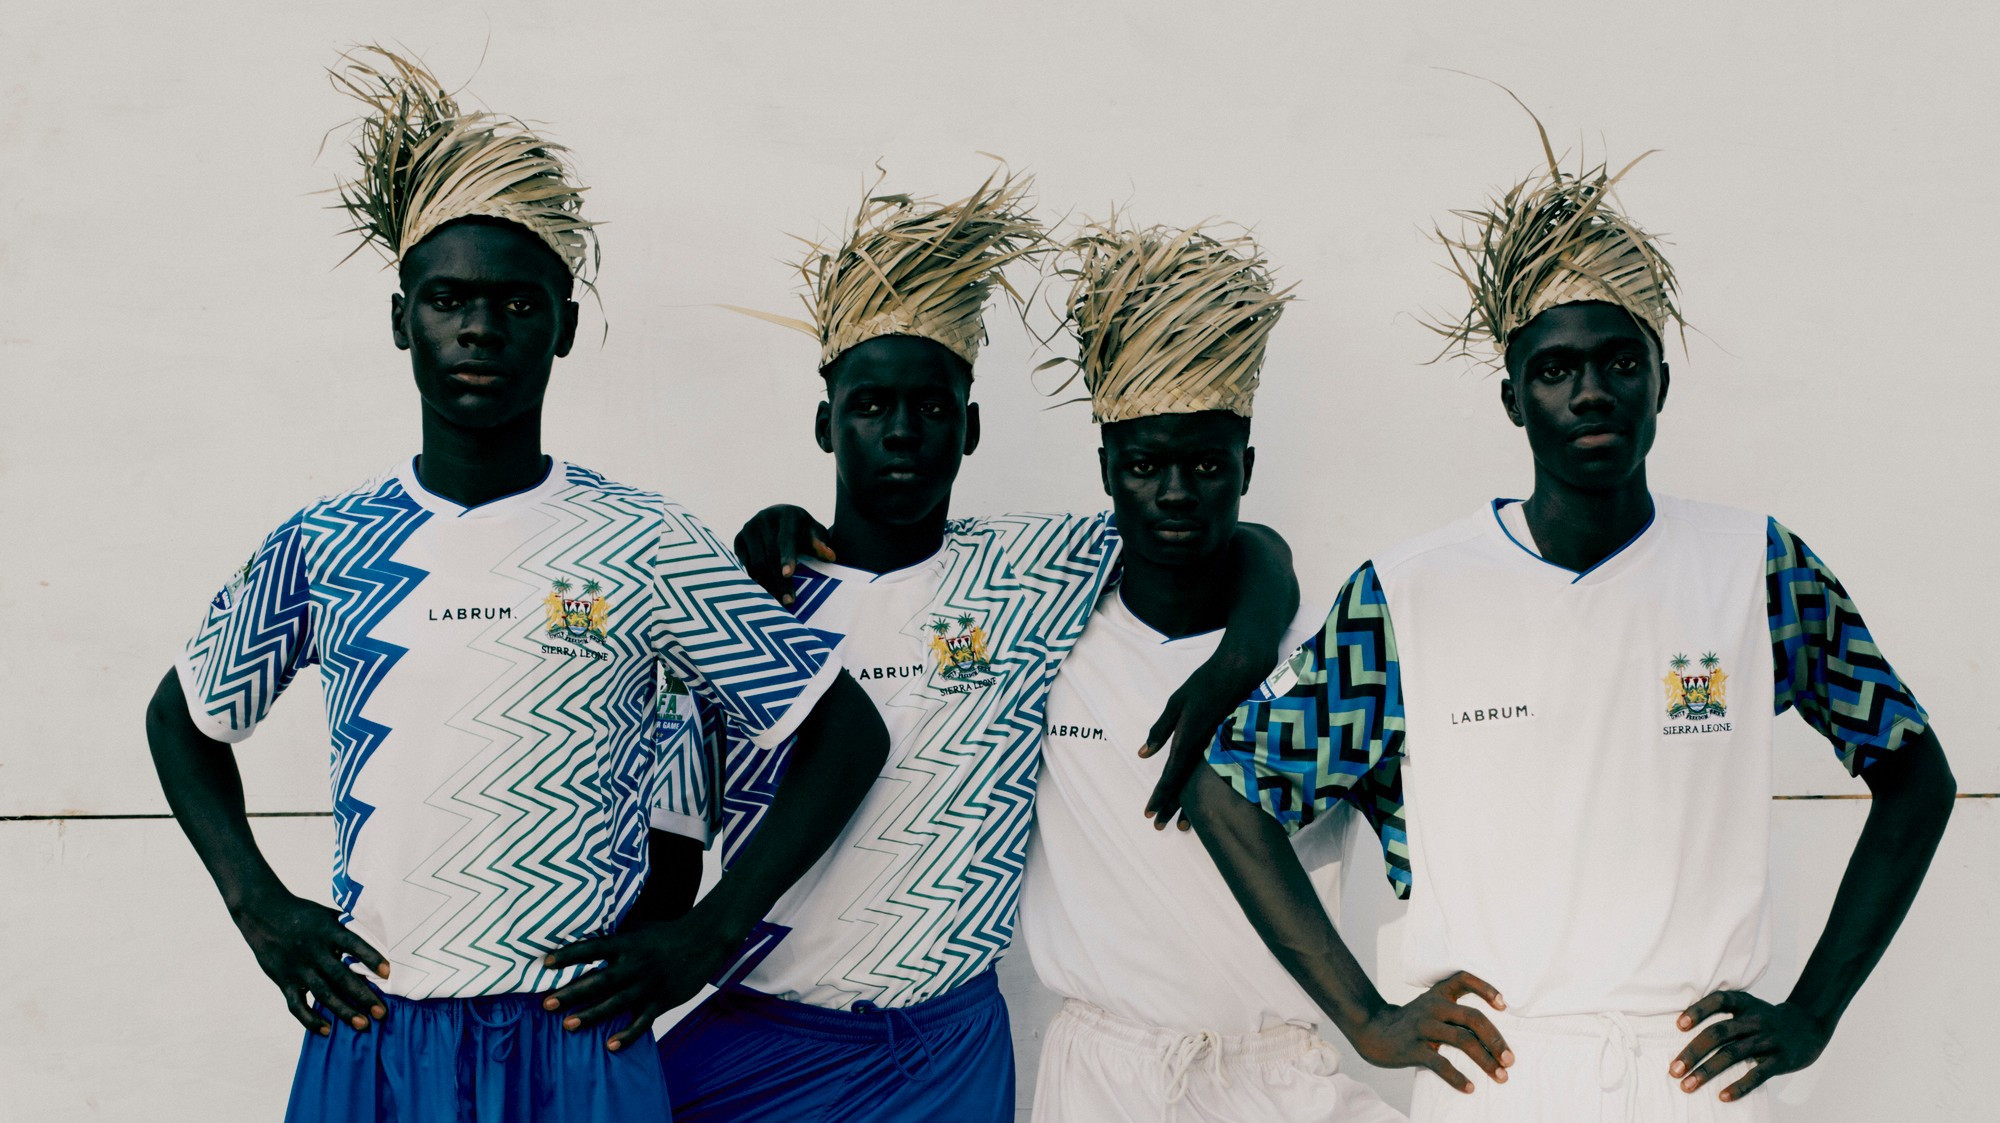 London-based fashion label Labrum has designed the official kit for the Sierra Leone team competing at next year's Olympics in Tokyo ©Labrum London